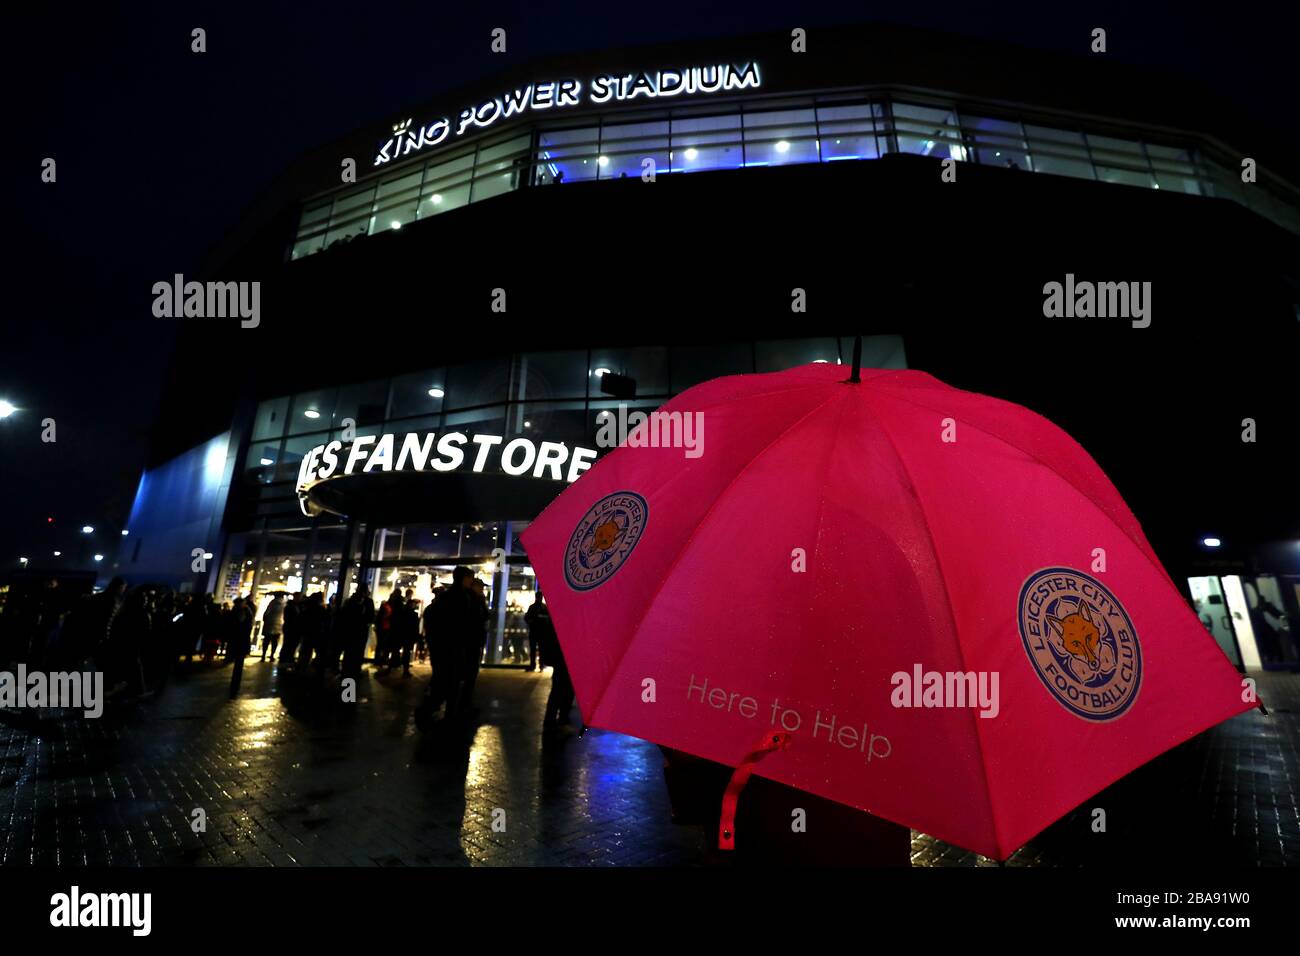 City fanstore at the king power stadium hi-res stock photography